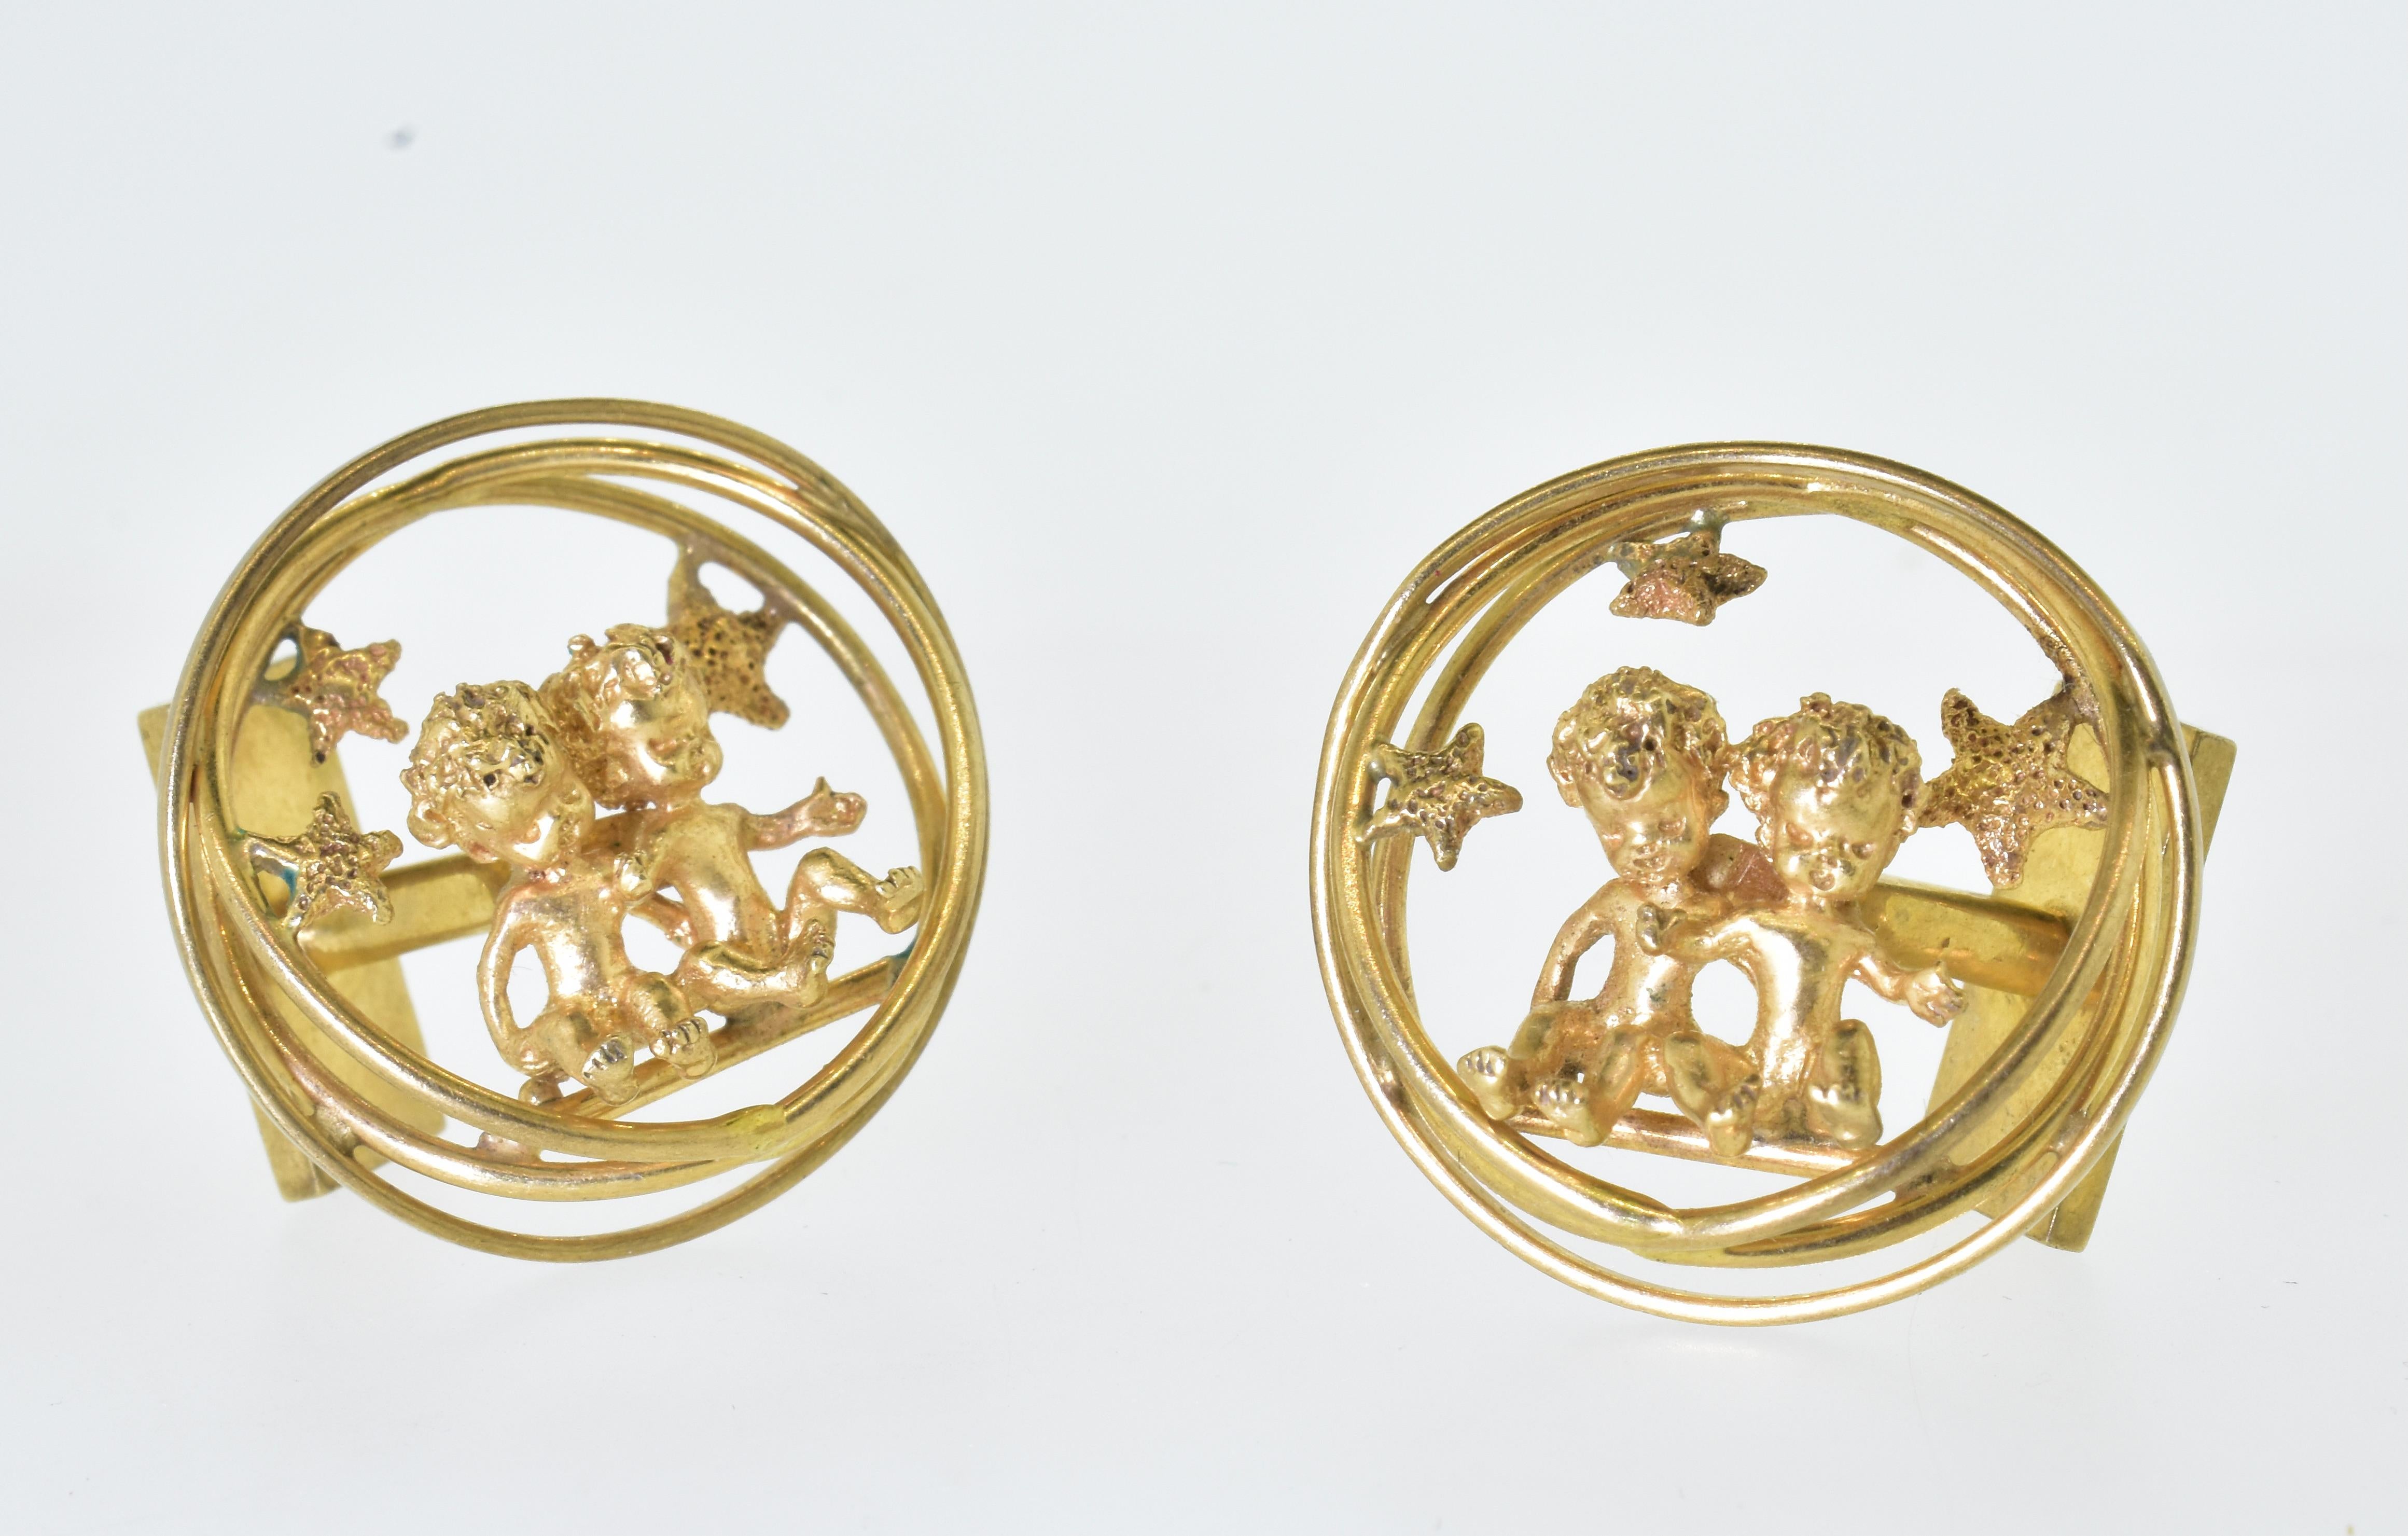 William Ruser, the famous American designer is know for his charming angel motif jewelry.  These cufflinks and rarely seen today.  Made in the 1950's, these cufflinks are well made, a large size and in fine condition.  The backs are canted so one is